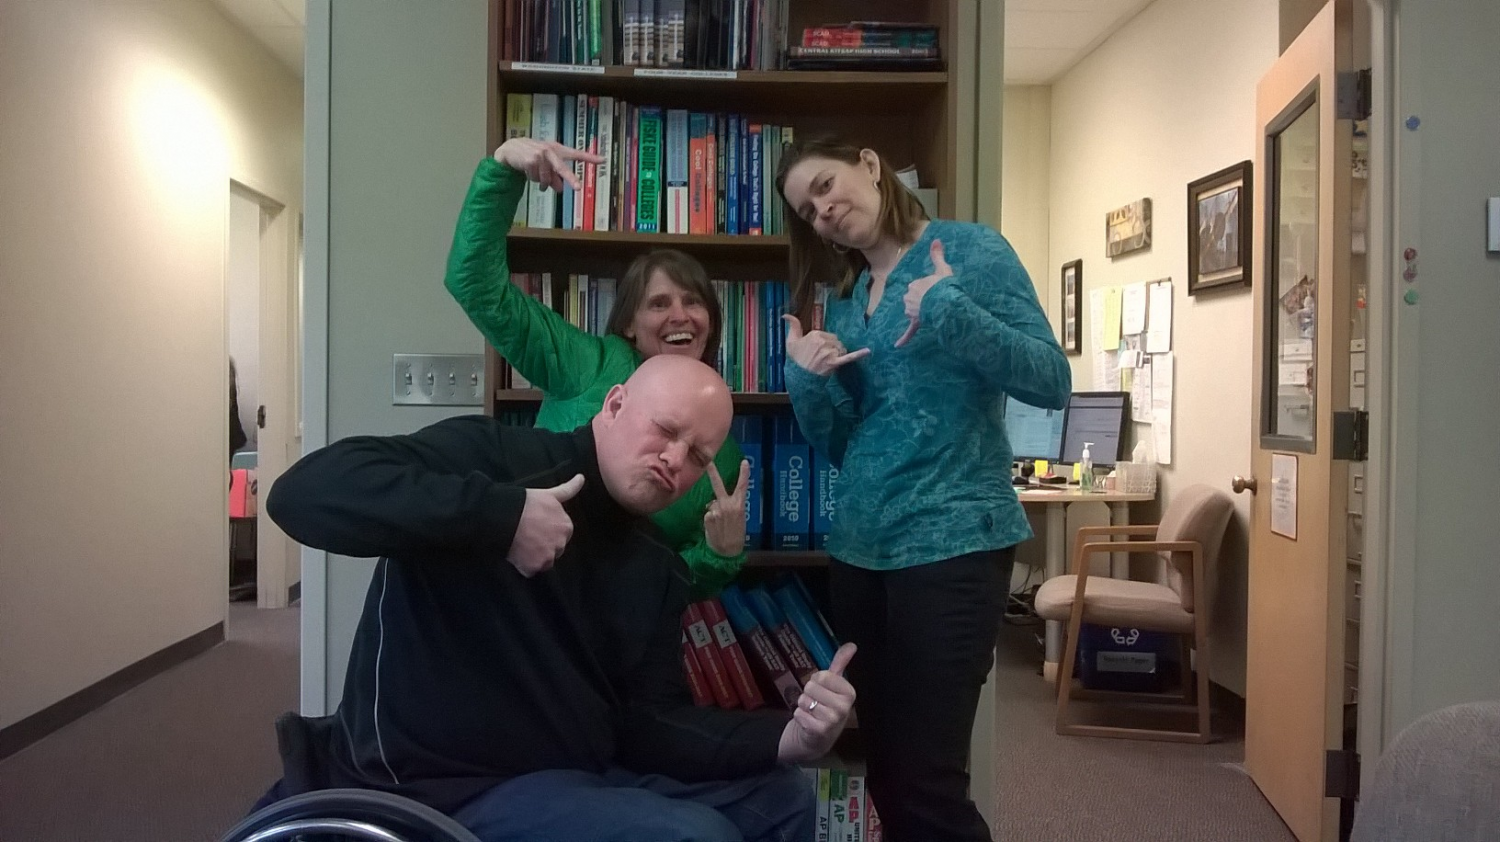 Our counselors (Minus Mr. Templeton) getting pumped about foster care